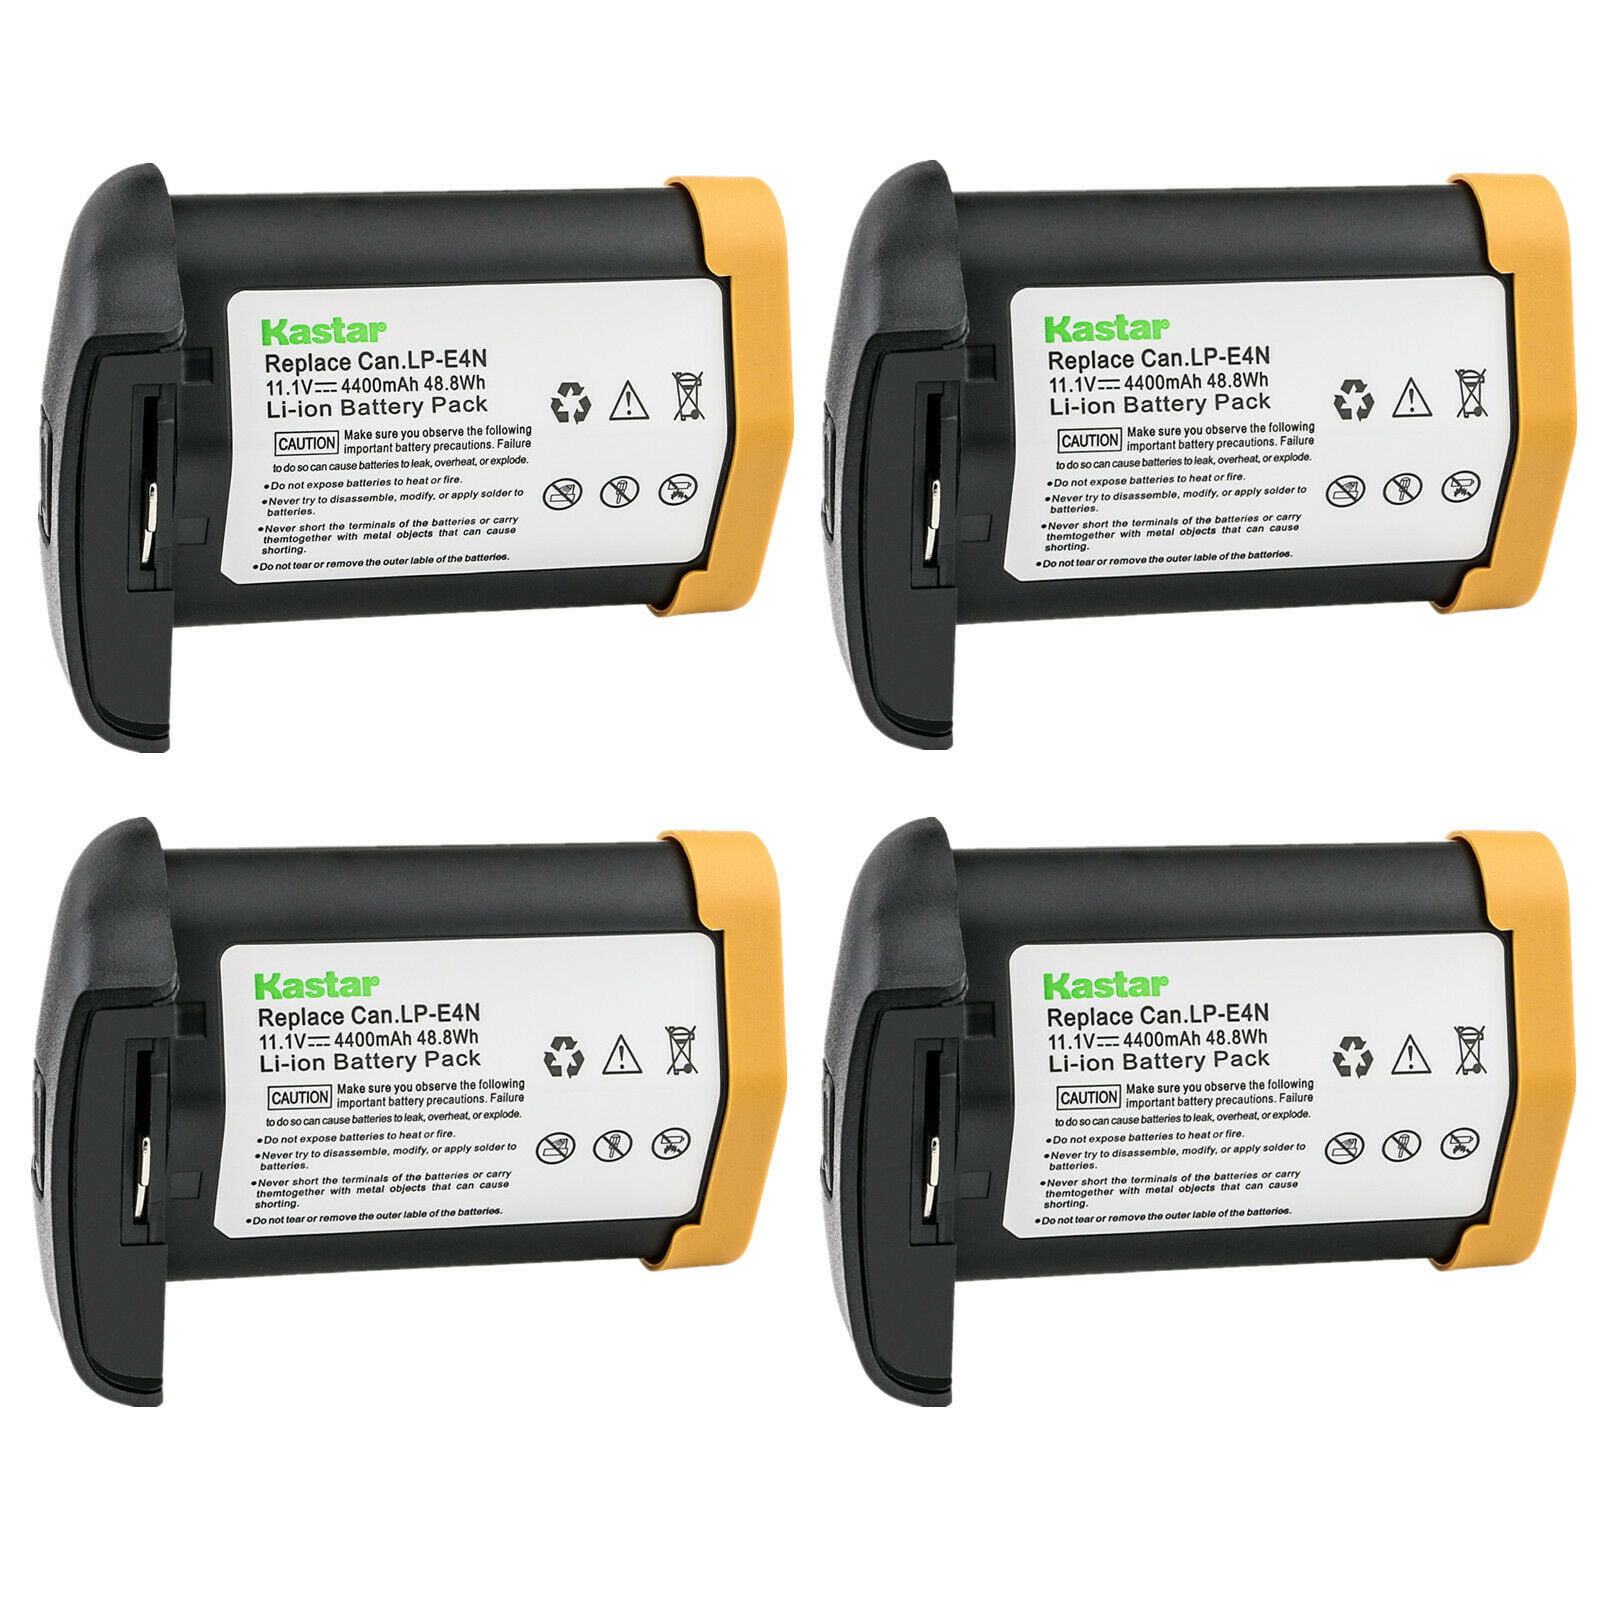 Lp batteries. Canon CB-570 car Battery Cable for Canon LC-e4 and CG-570 Battery Charger.